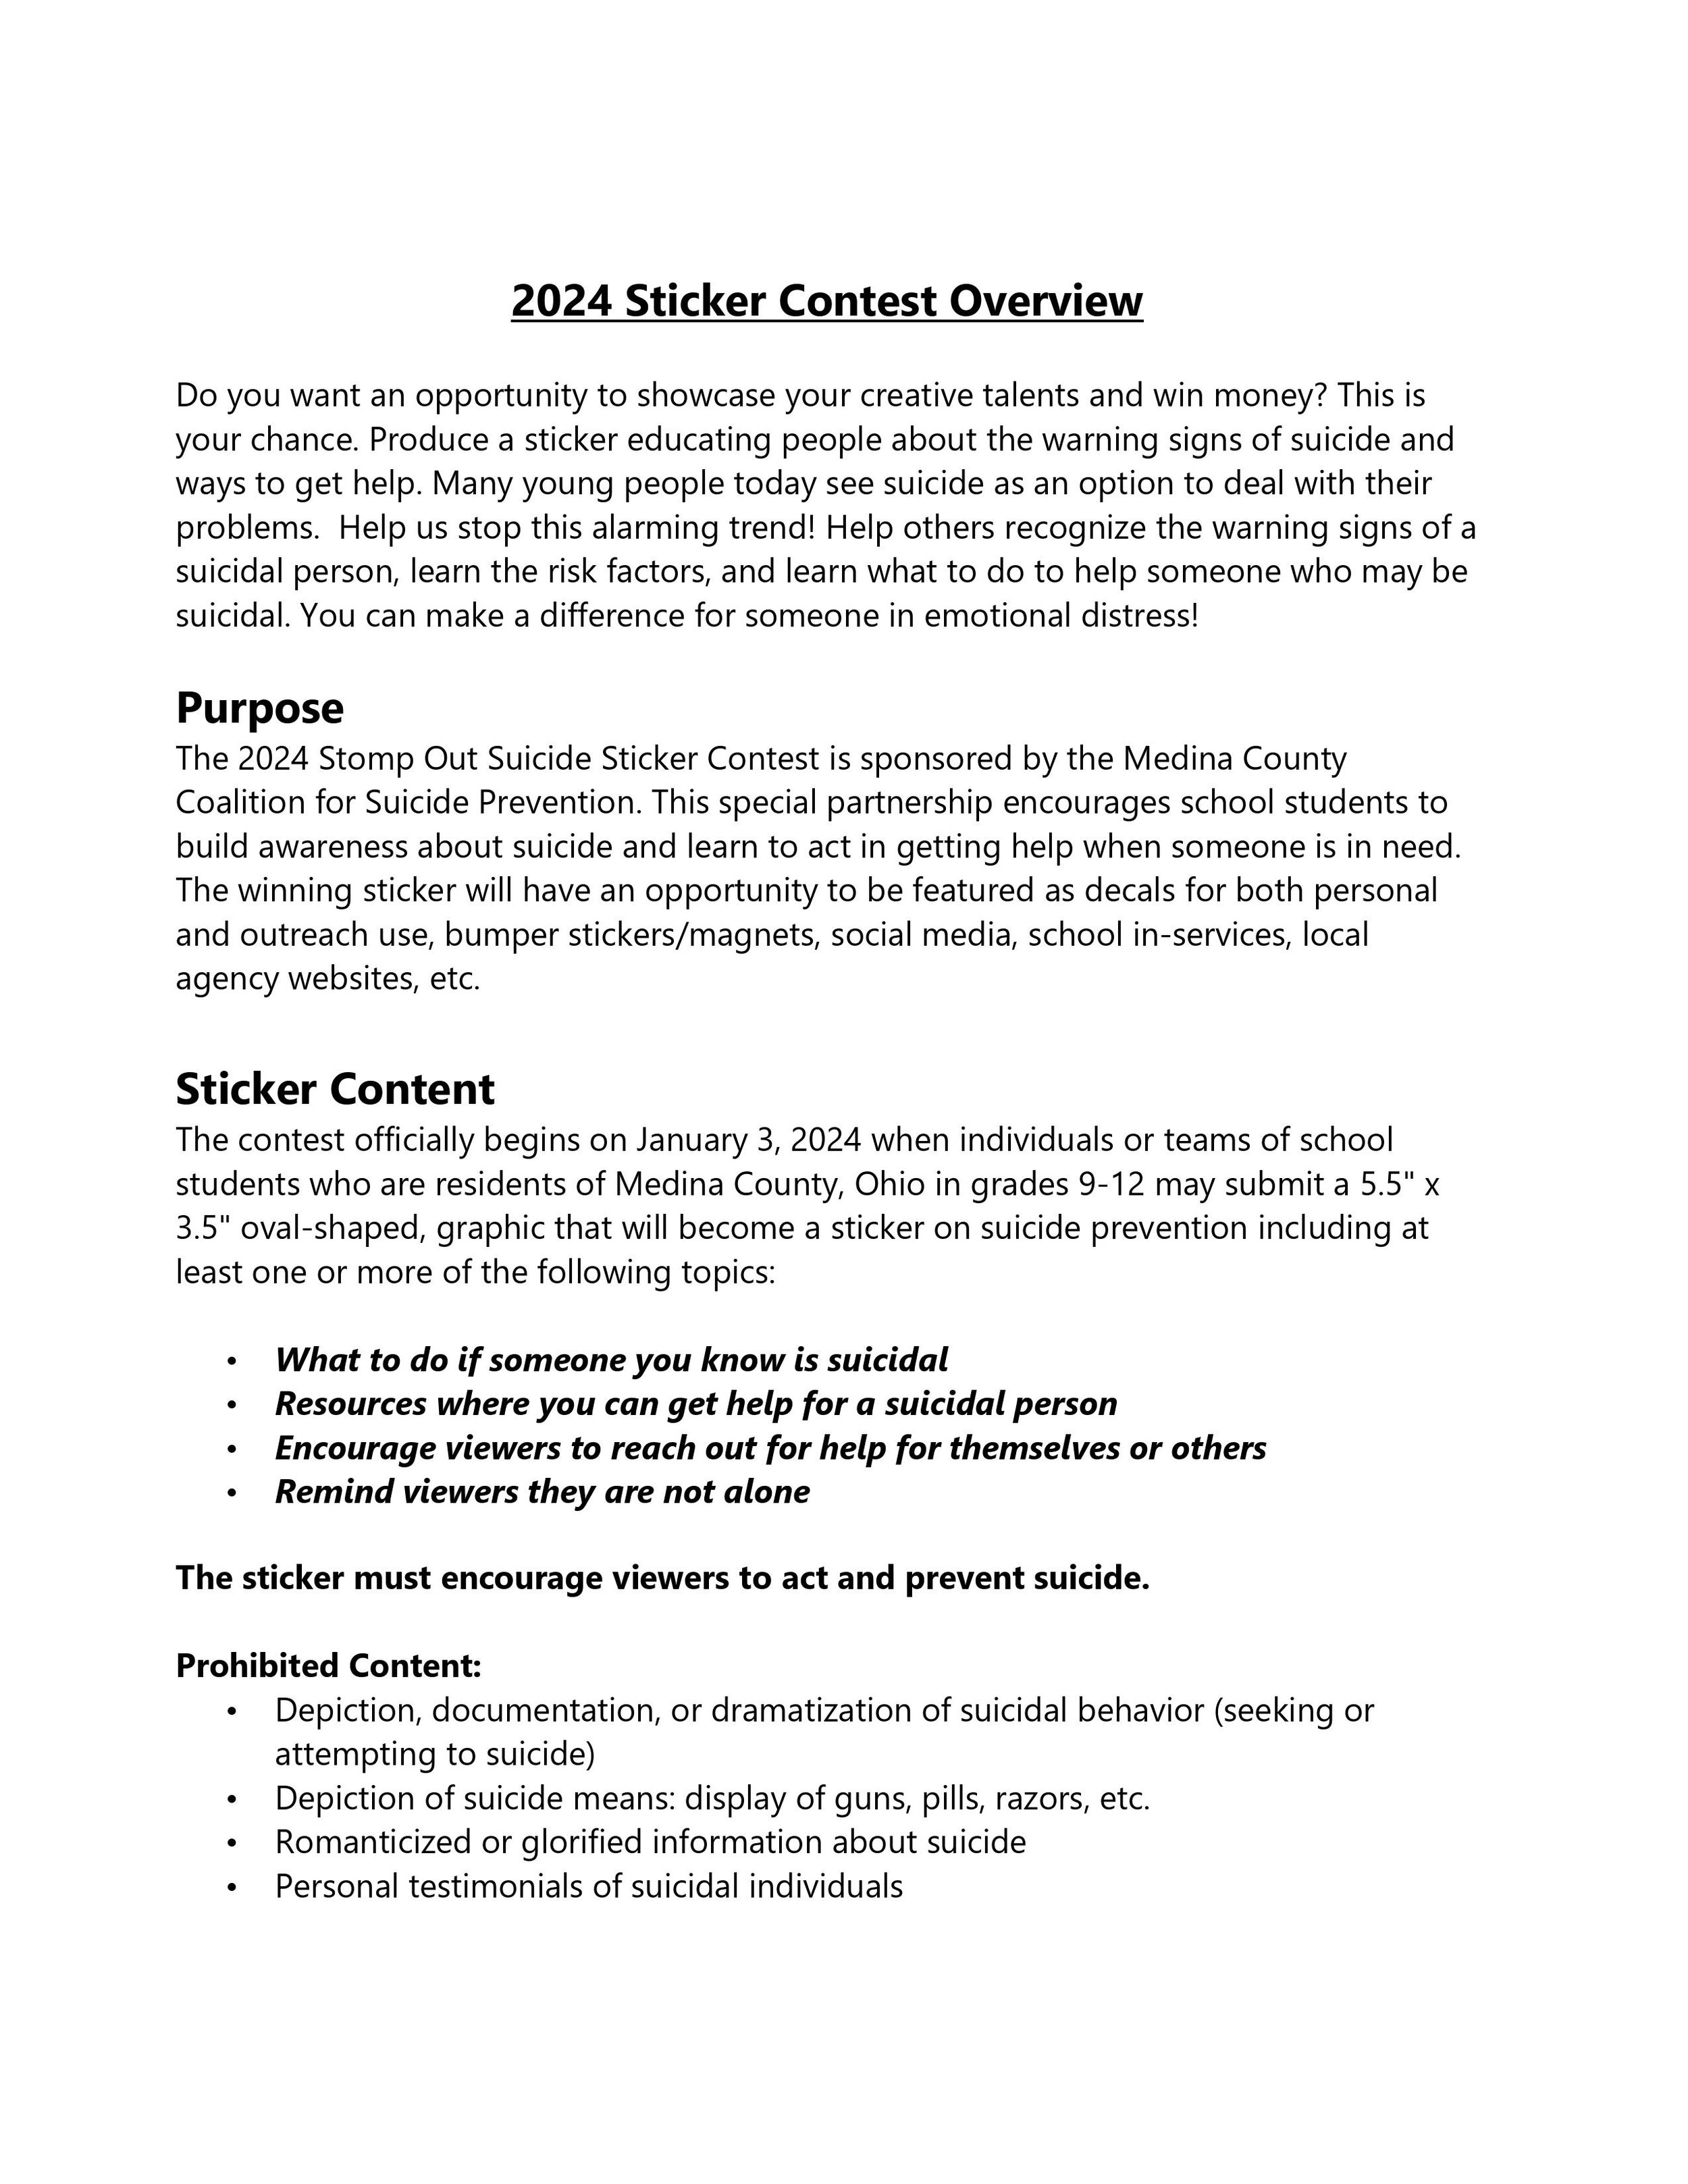 2024 Official Sticker Contest Rules and Guidelines Packet_HS Only-2.jpg